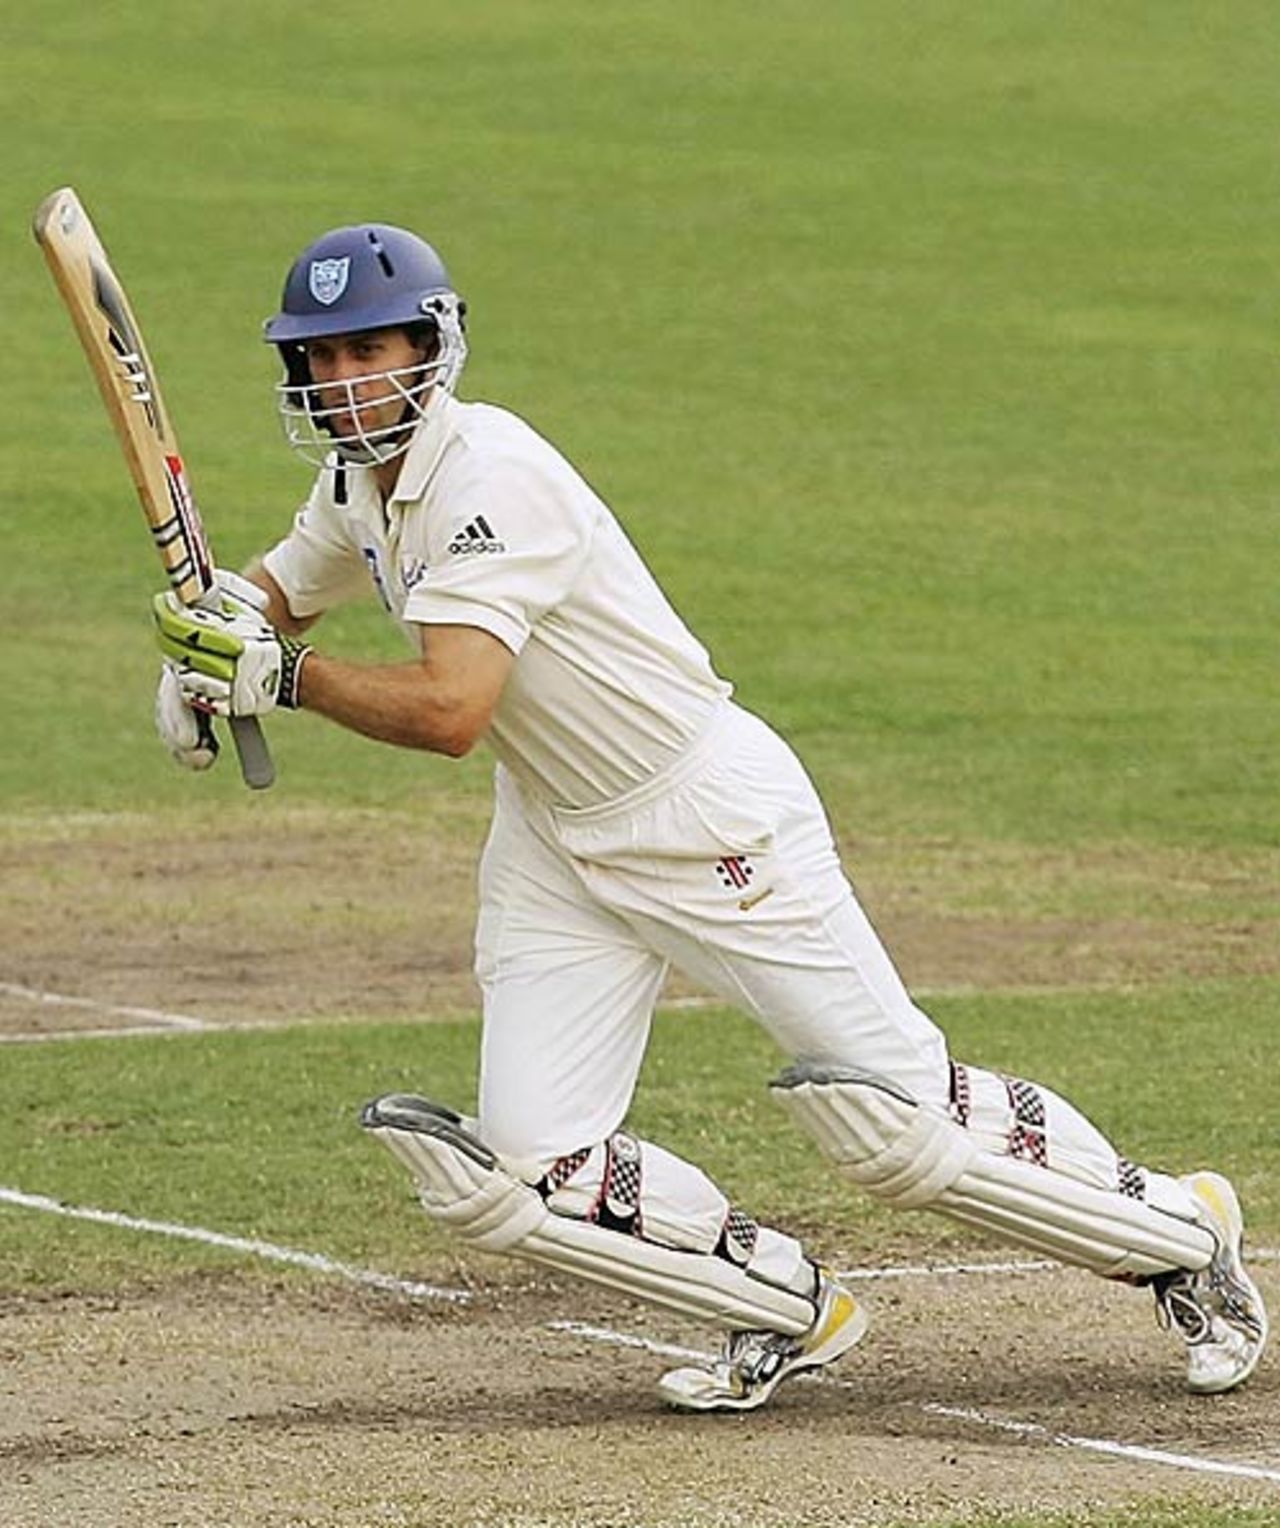 Simon Katich takes off for a run on his way to 205, New South Wales v Queensland, Pura Cup, Sydney, March 1, 2007